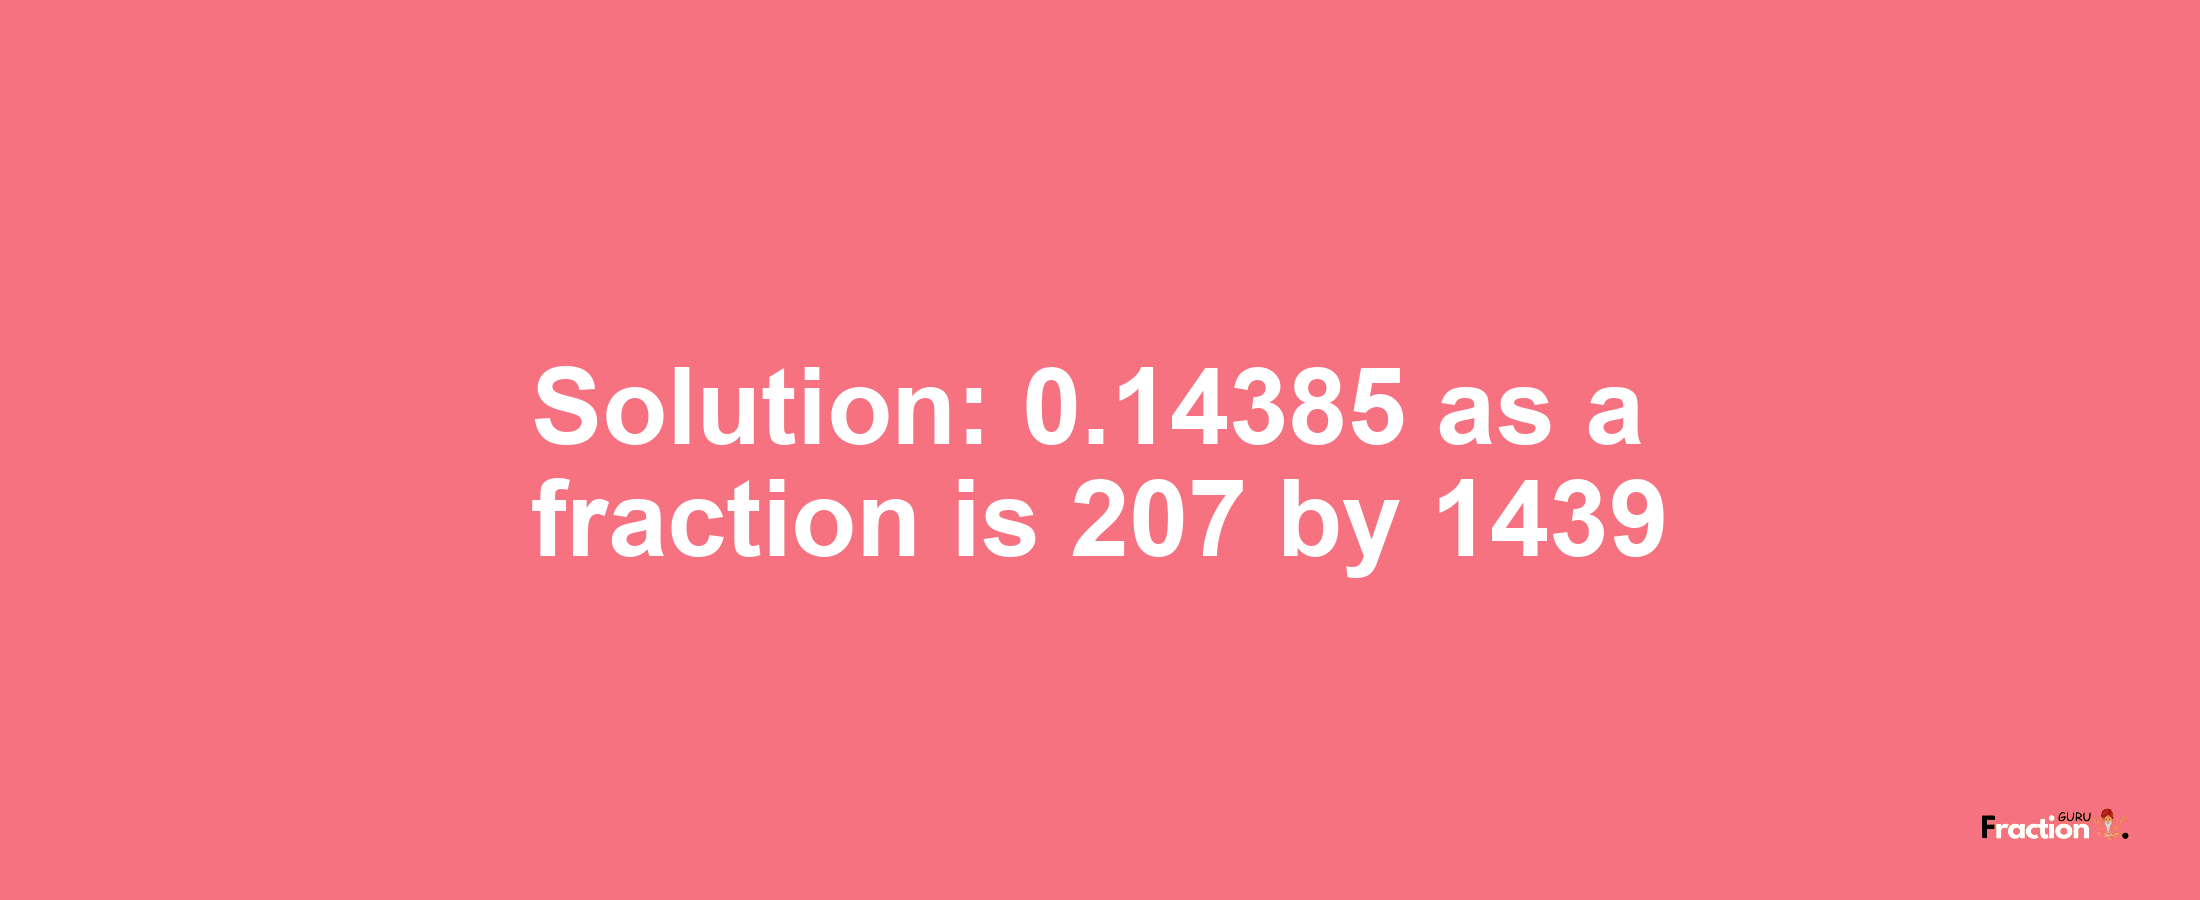 Solution:0.14385 as a fraction is 207/1439